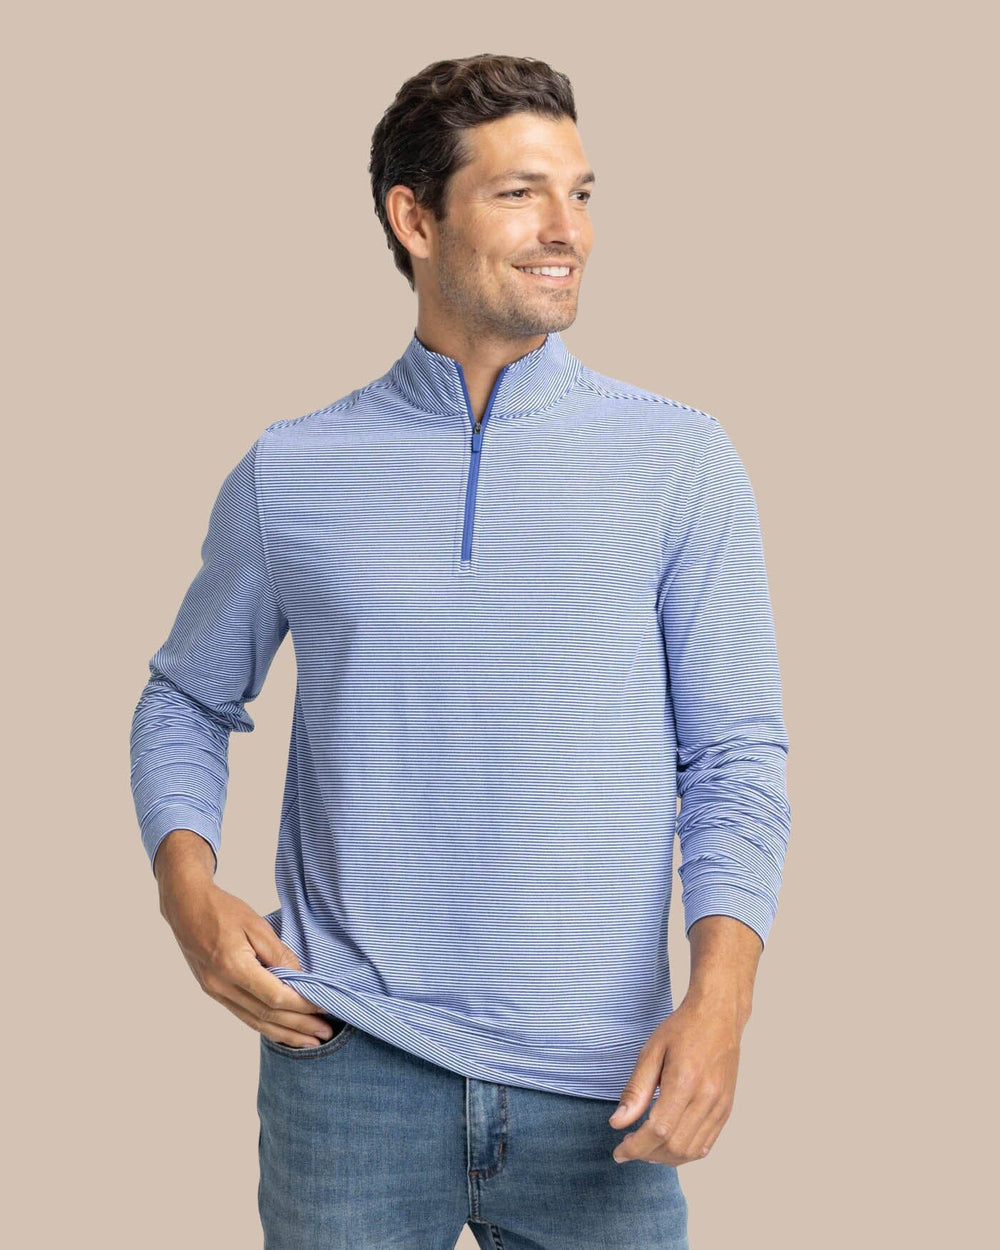 The front view of the Southern Tide Cruiser Micro-Stripe Heather Quarter Zip by Southern Tide - Heather University Blue